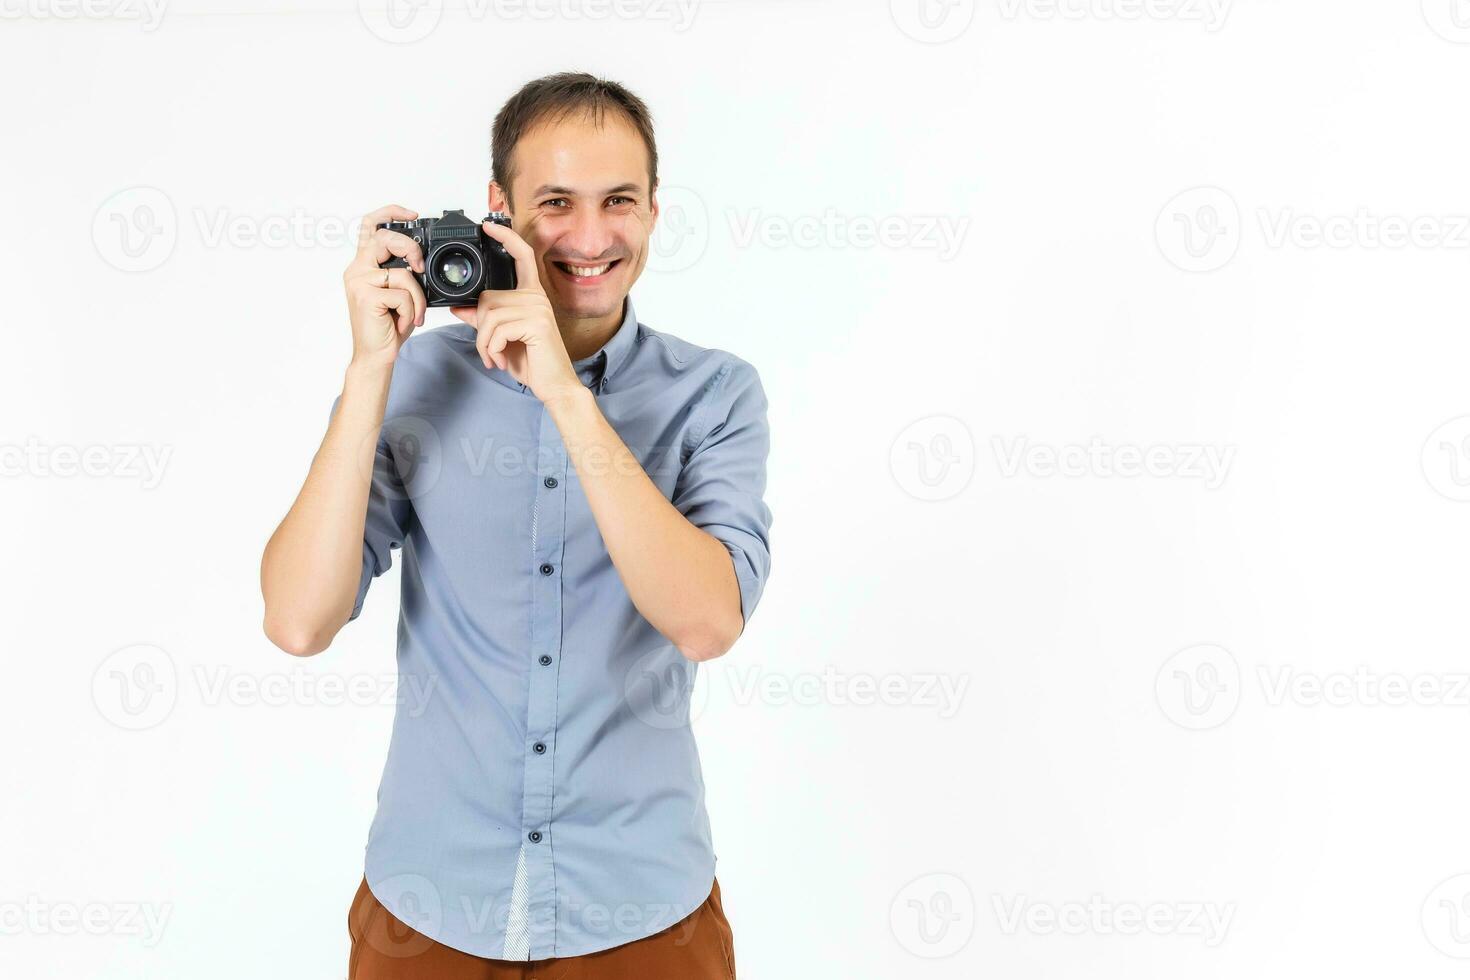 Bend young man taking photo with digital camera side view. isolated over white background.